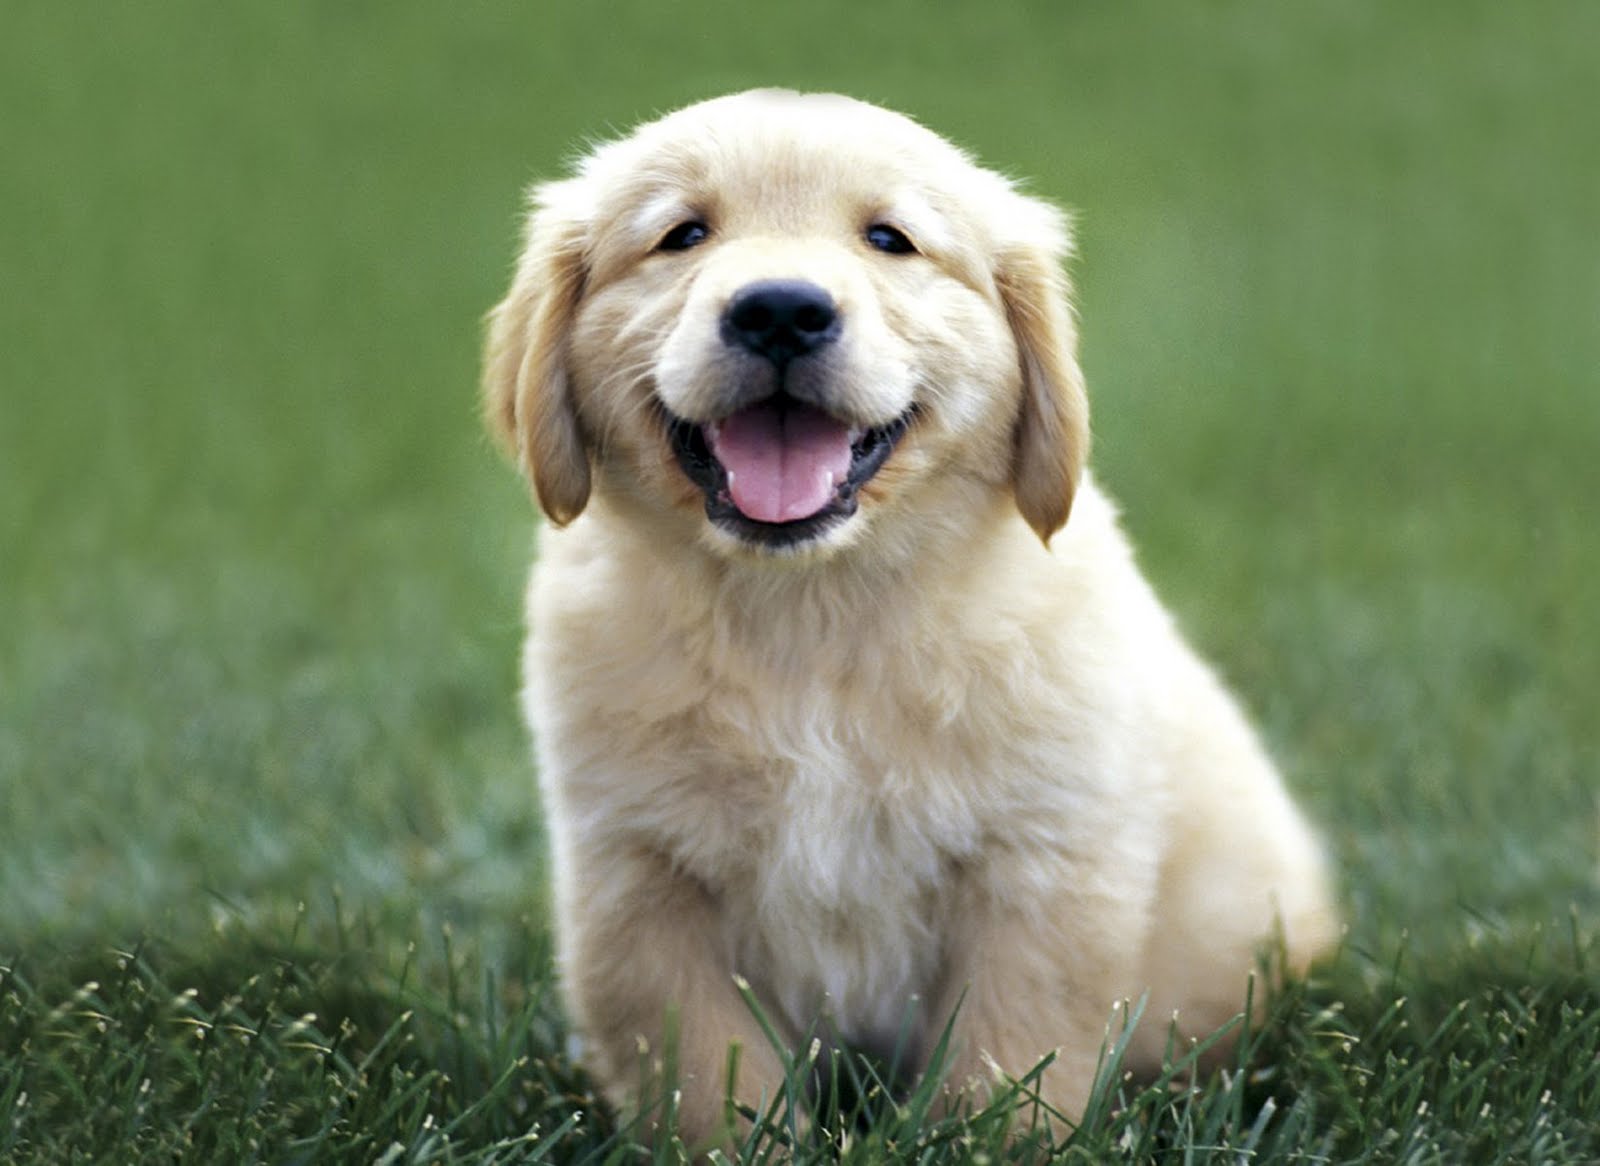 Golden Retriever dogs and puppies: Baby Golden Retrievers - GolDen+retriever+pup